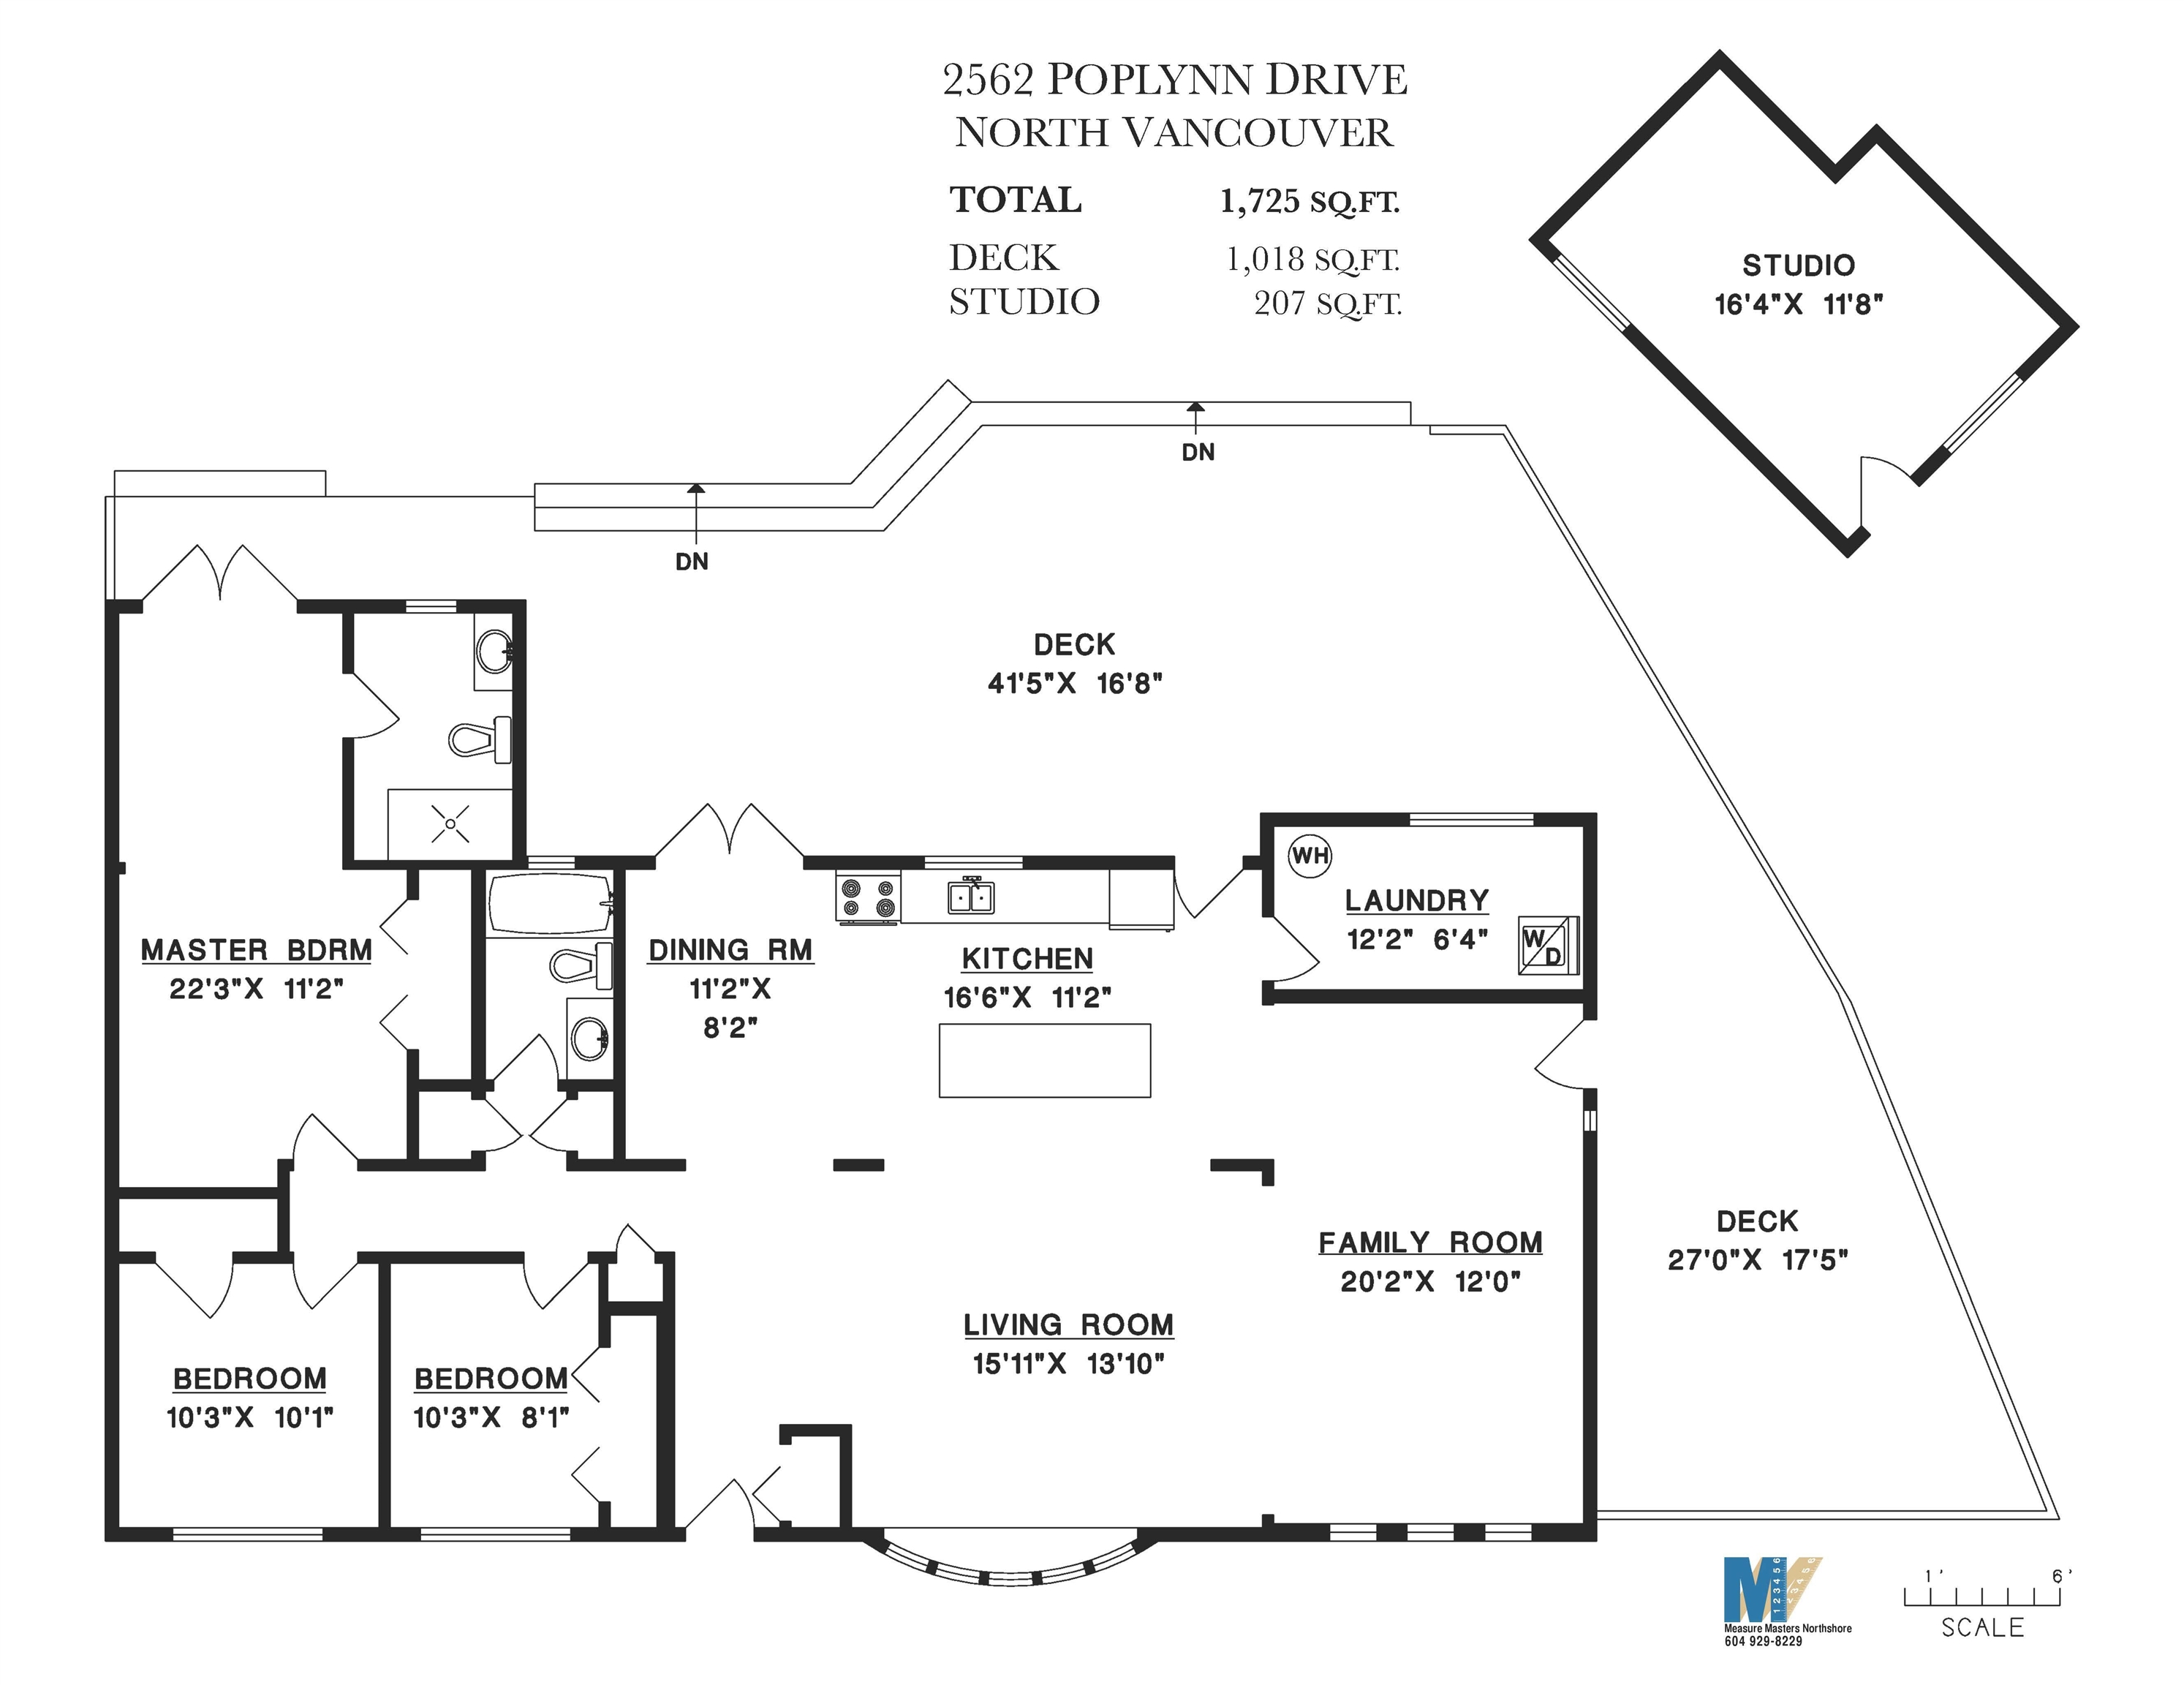 Listing image of 2562 POPLYNN DRIVE